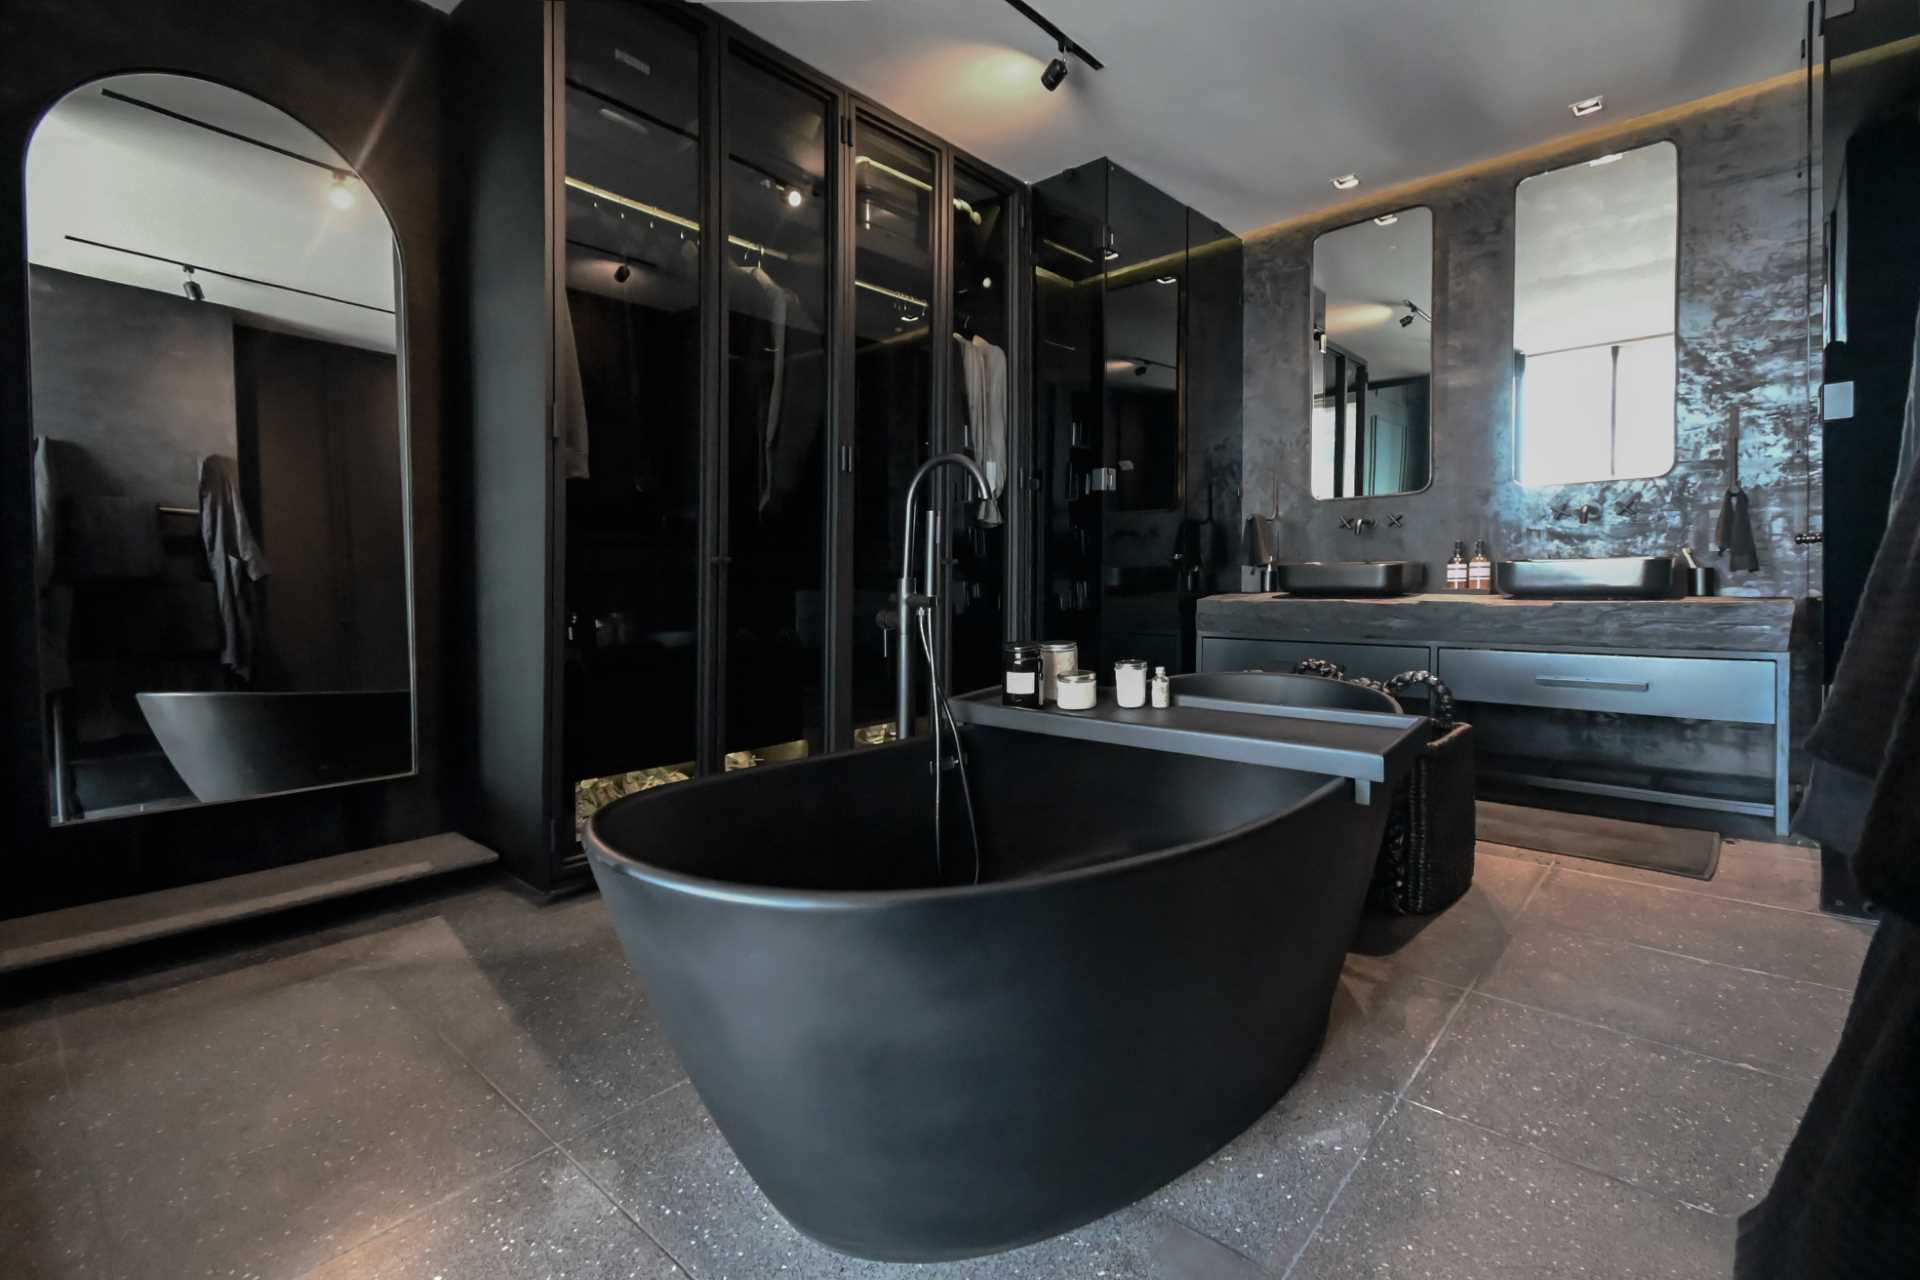 A modern black bathroom includes a freestanding black bathtub in the center of the room, a wall of gl،-fronted closets, and a double vanity. The toilet and s،wer are located behind gl، boxes on either side of the vanity.